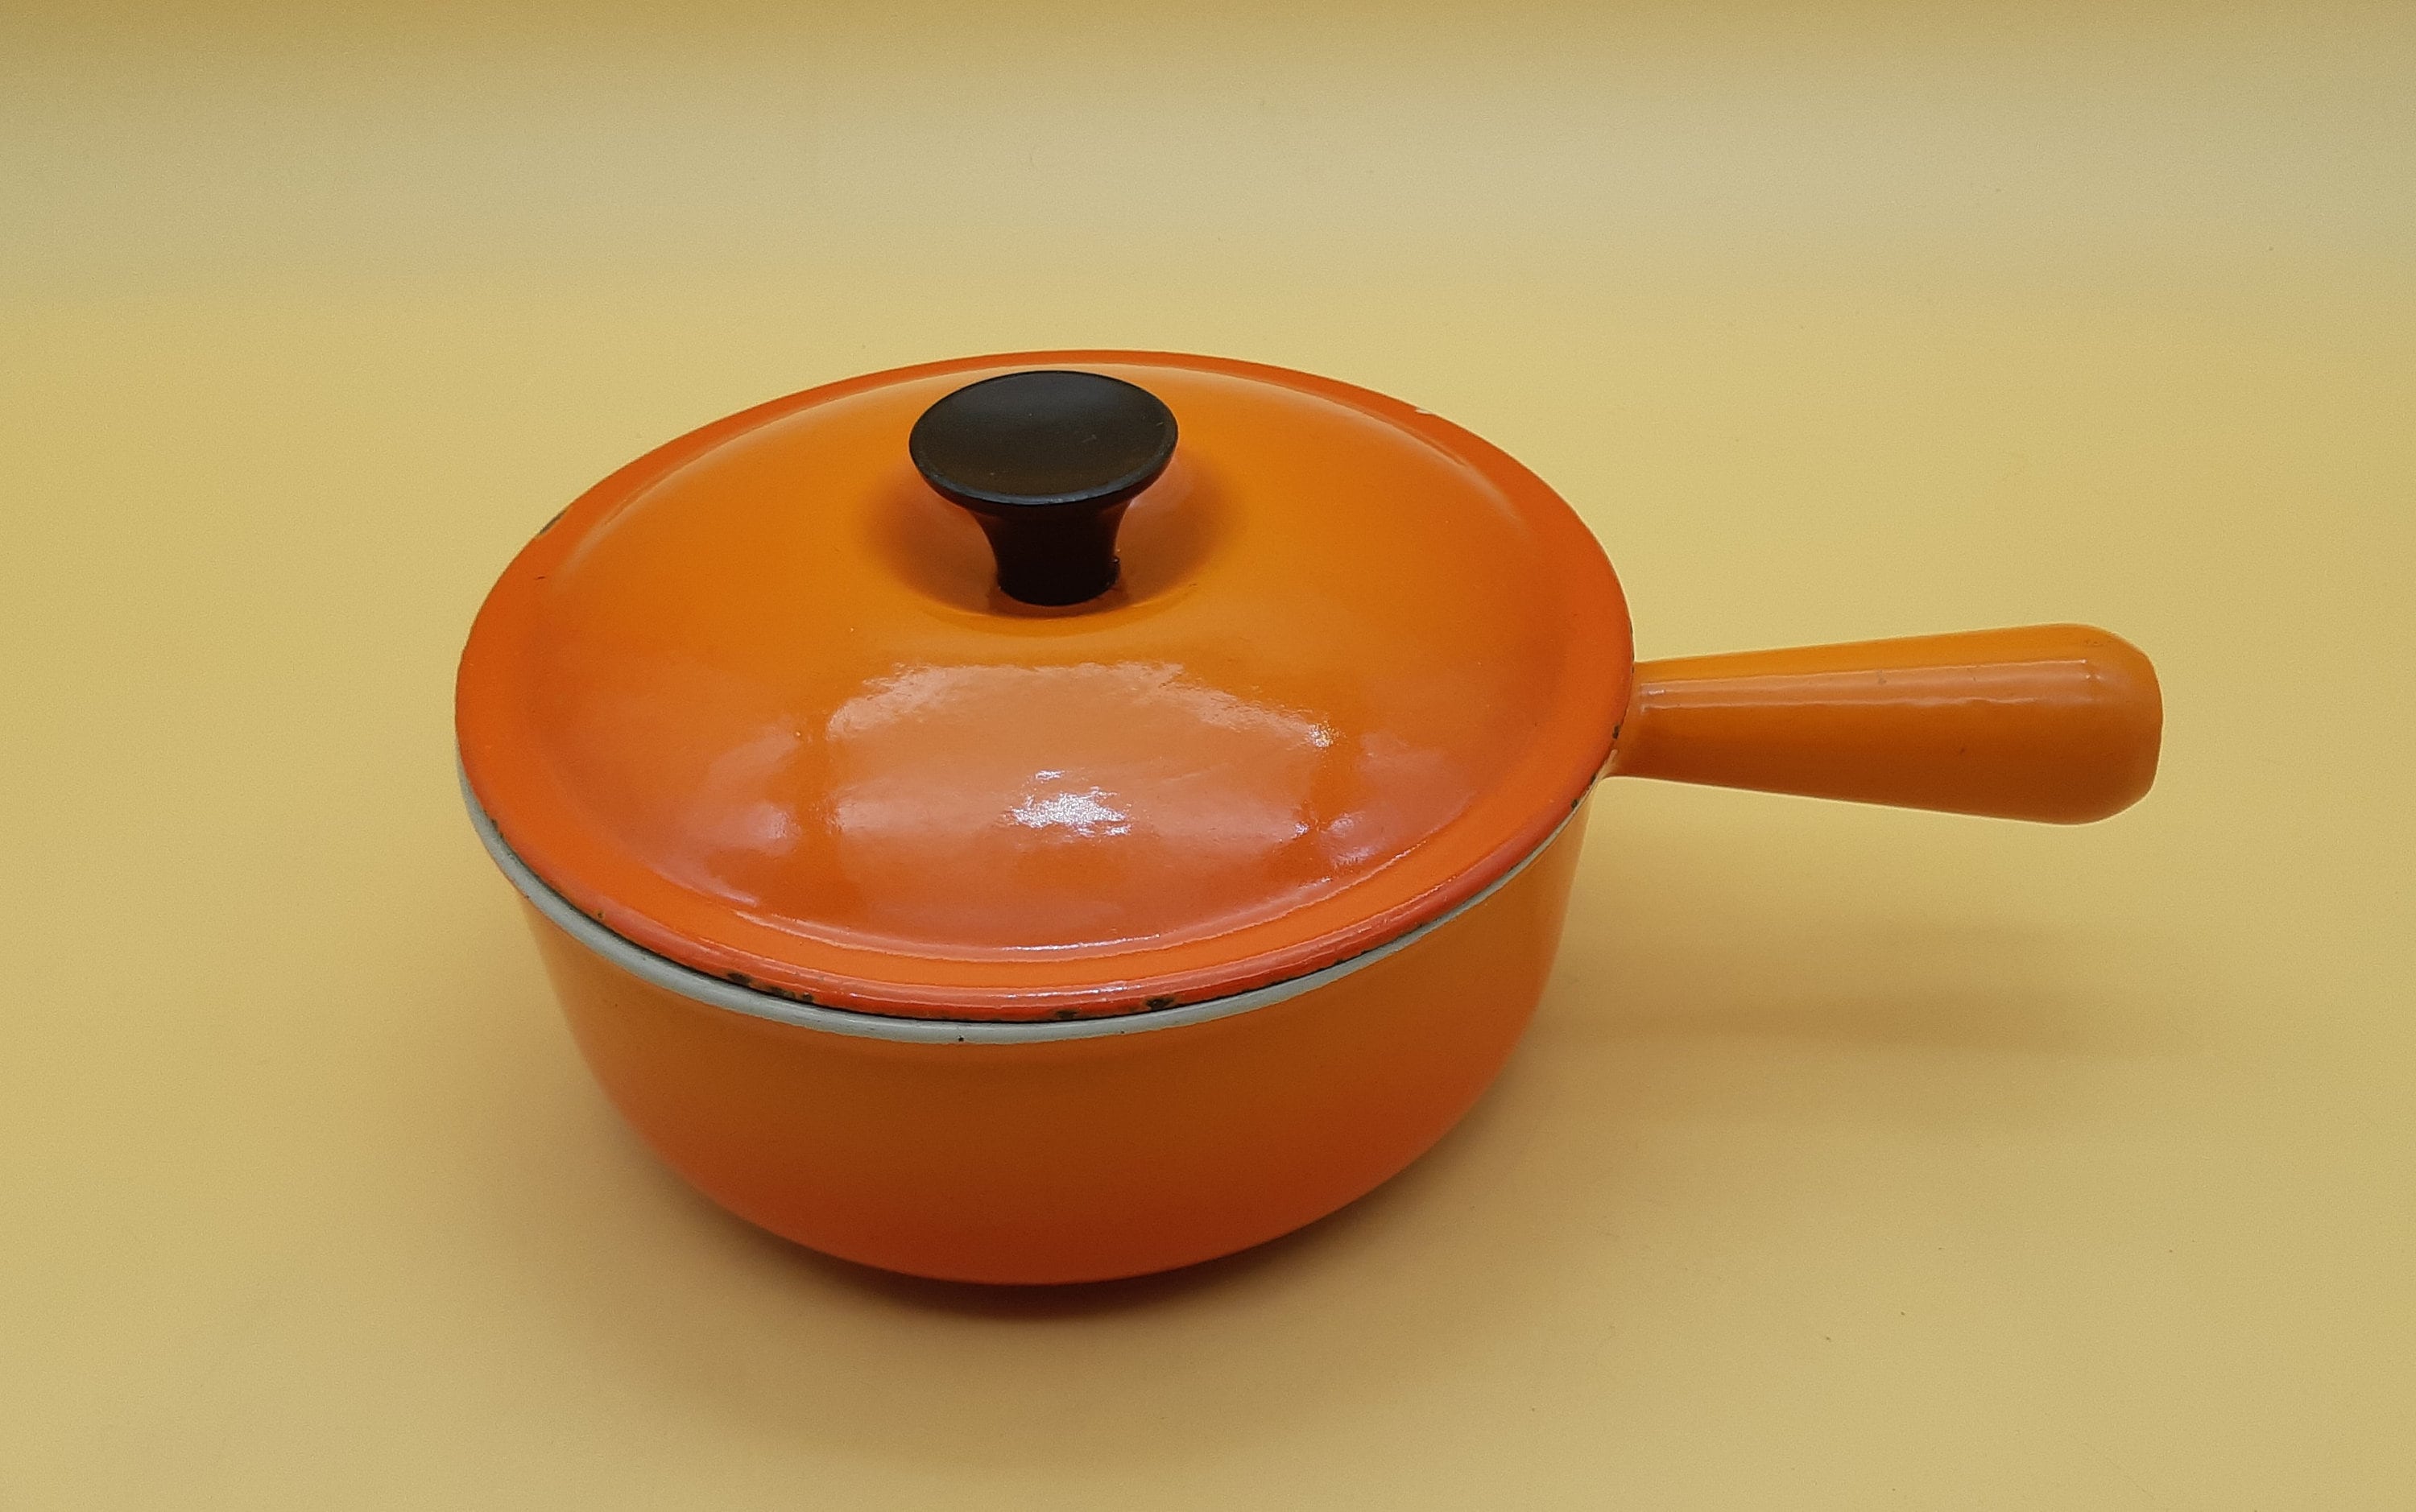 Le Creuset Iron With Lid 20 - Etsy